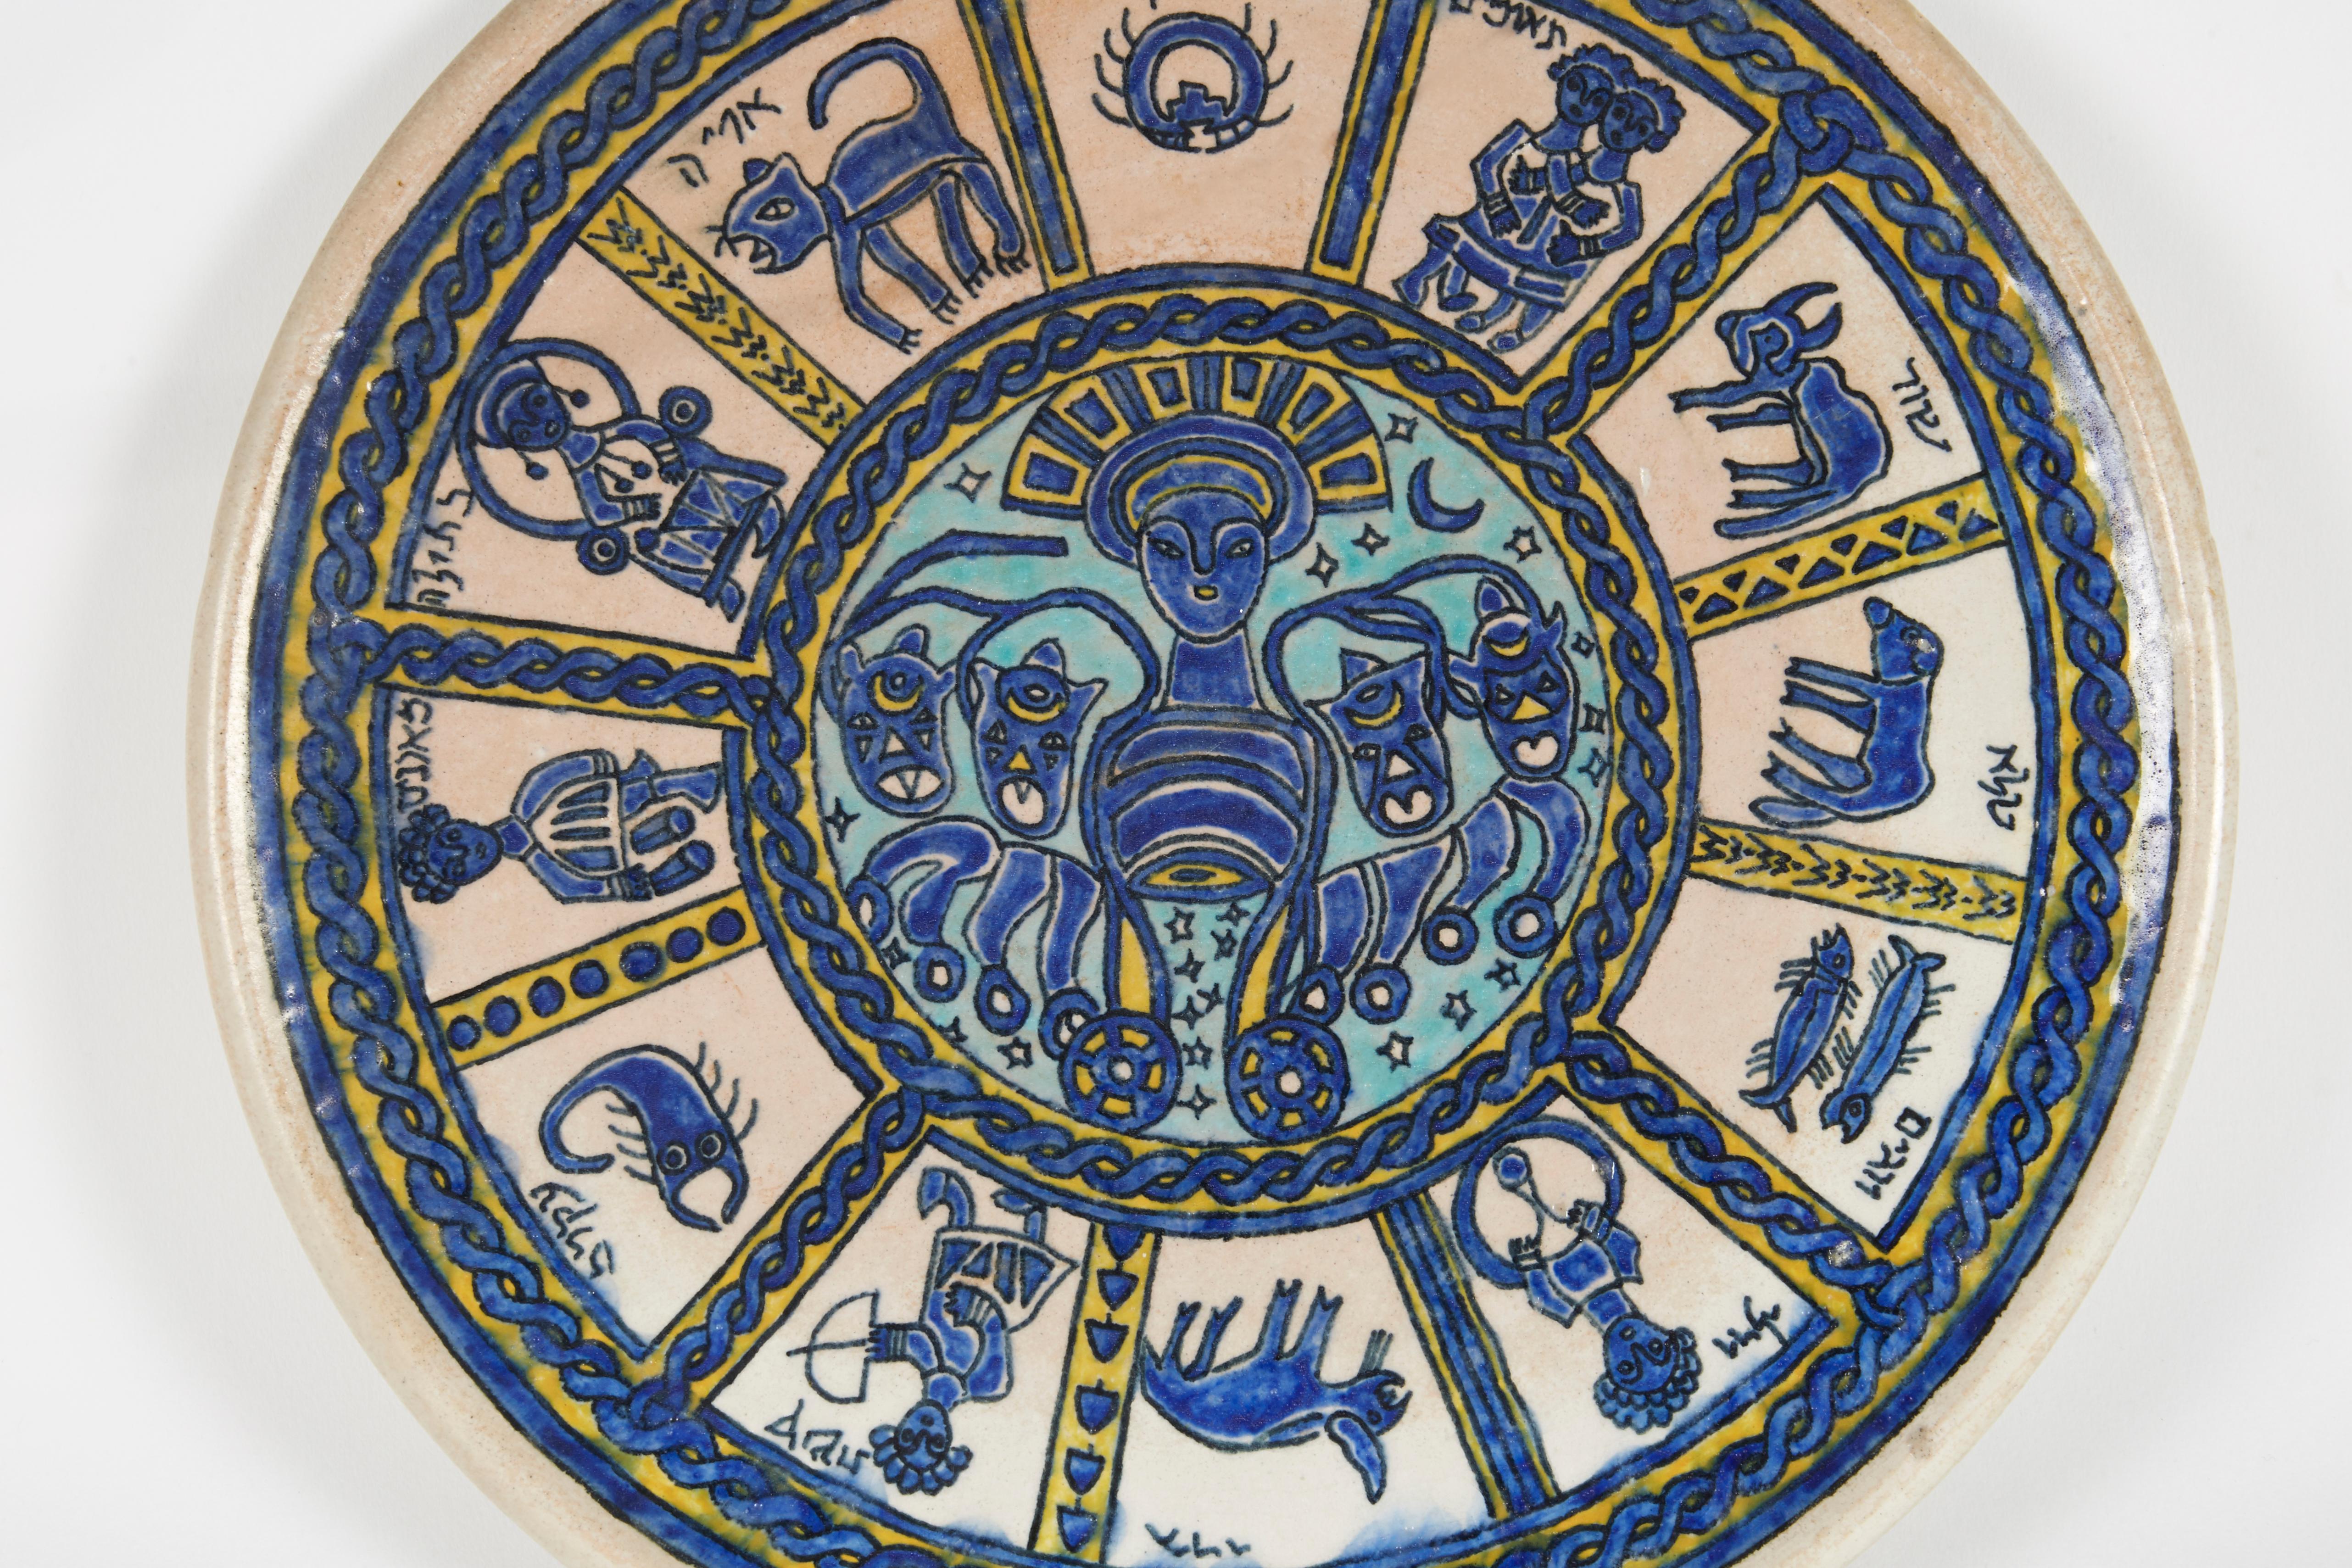 Extremely rare Armenian pottery plate depicting the mosaic floor at the ancient synagogue of Beit Alpha in Israel, circa 1920.
Jerusalem's ancient Armenian Community experienced a major increase in numbers as survivors of the Armenian Genocide